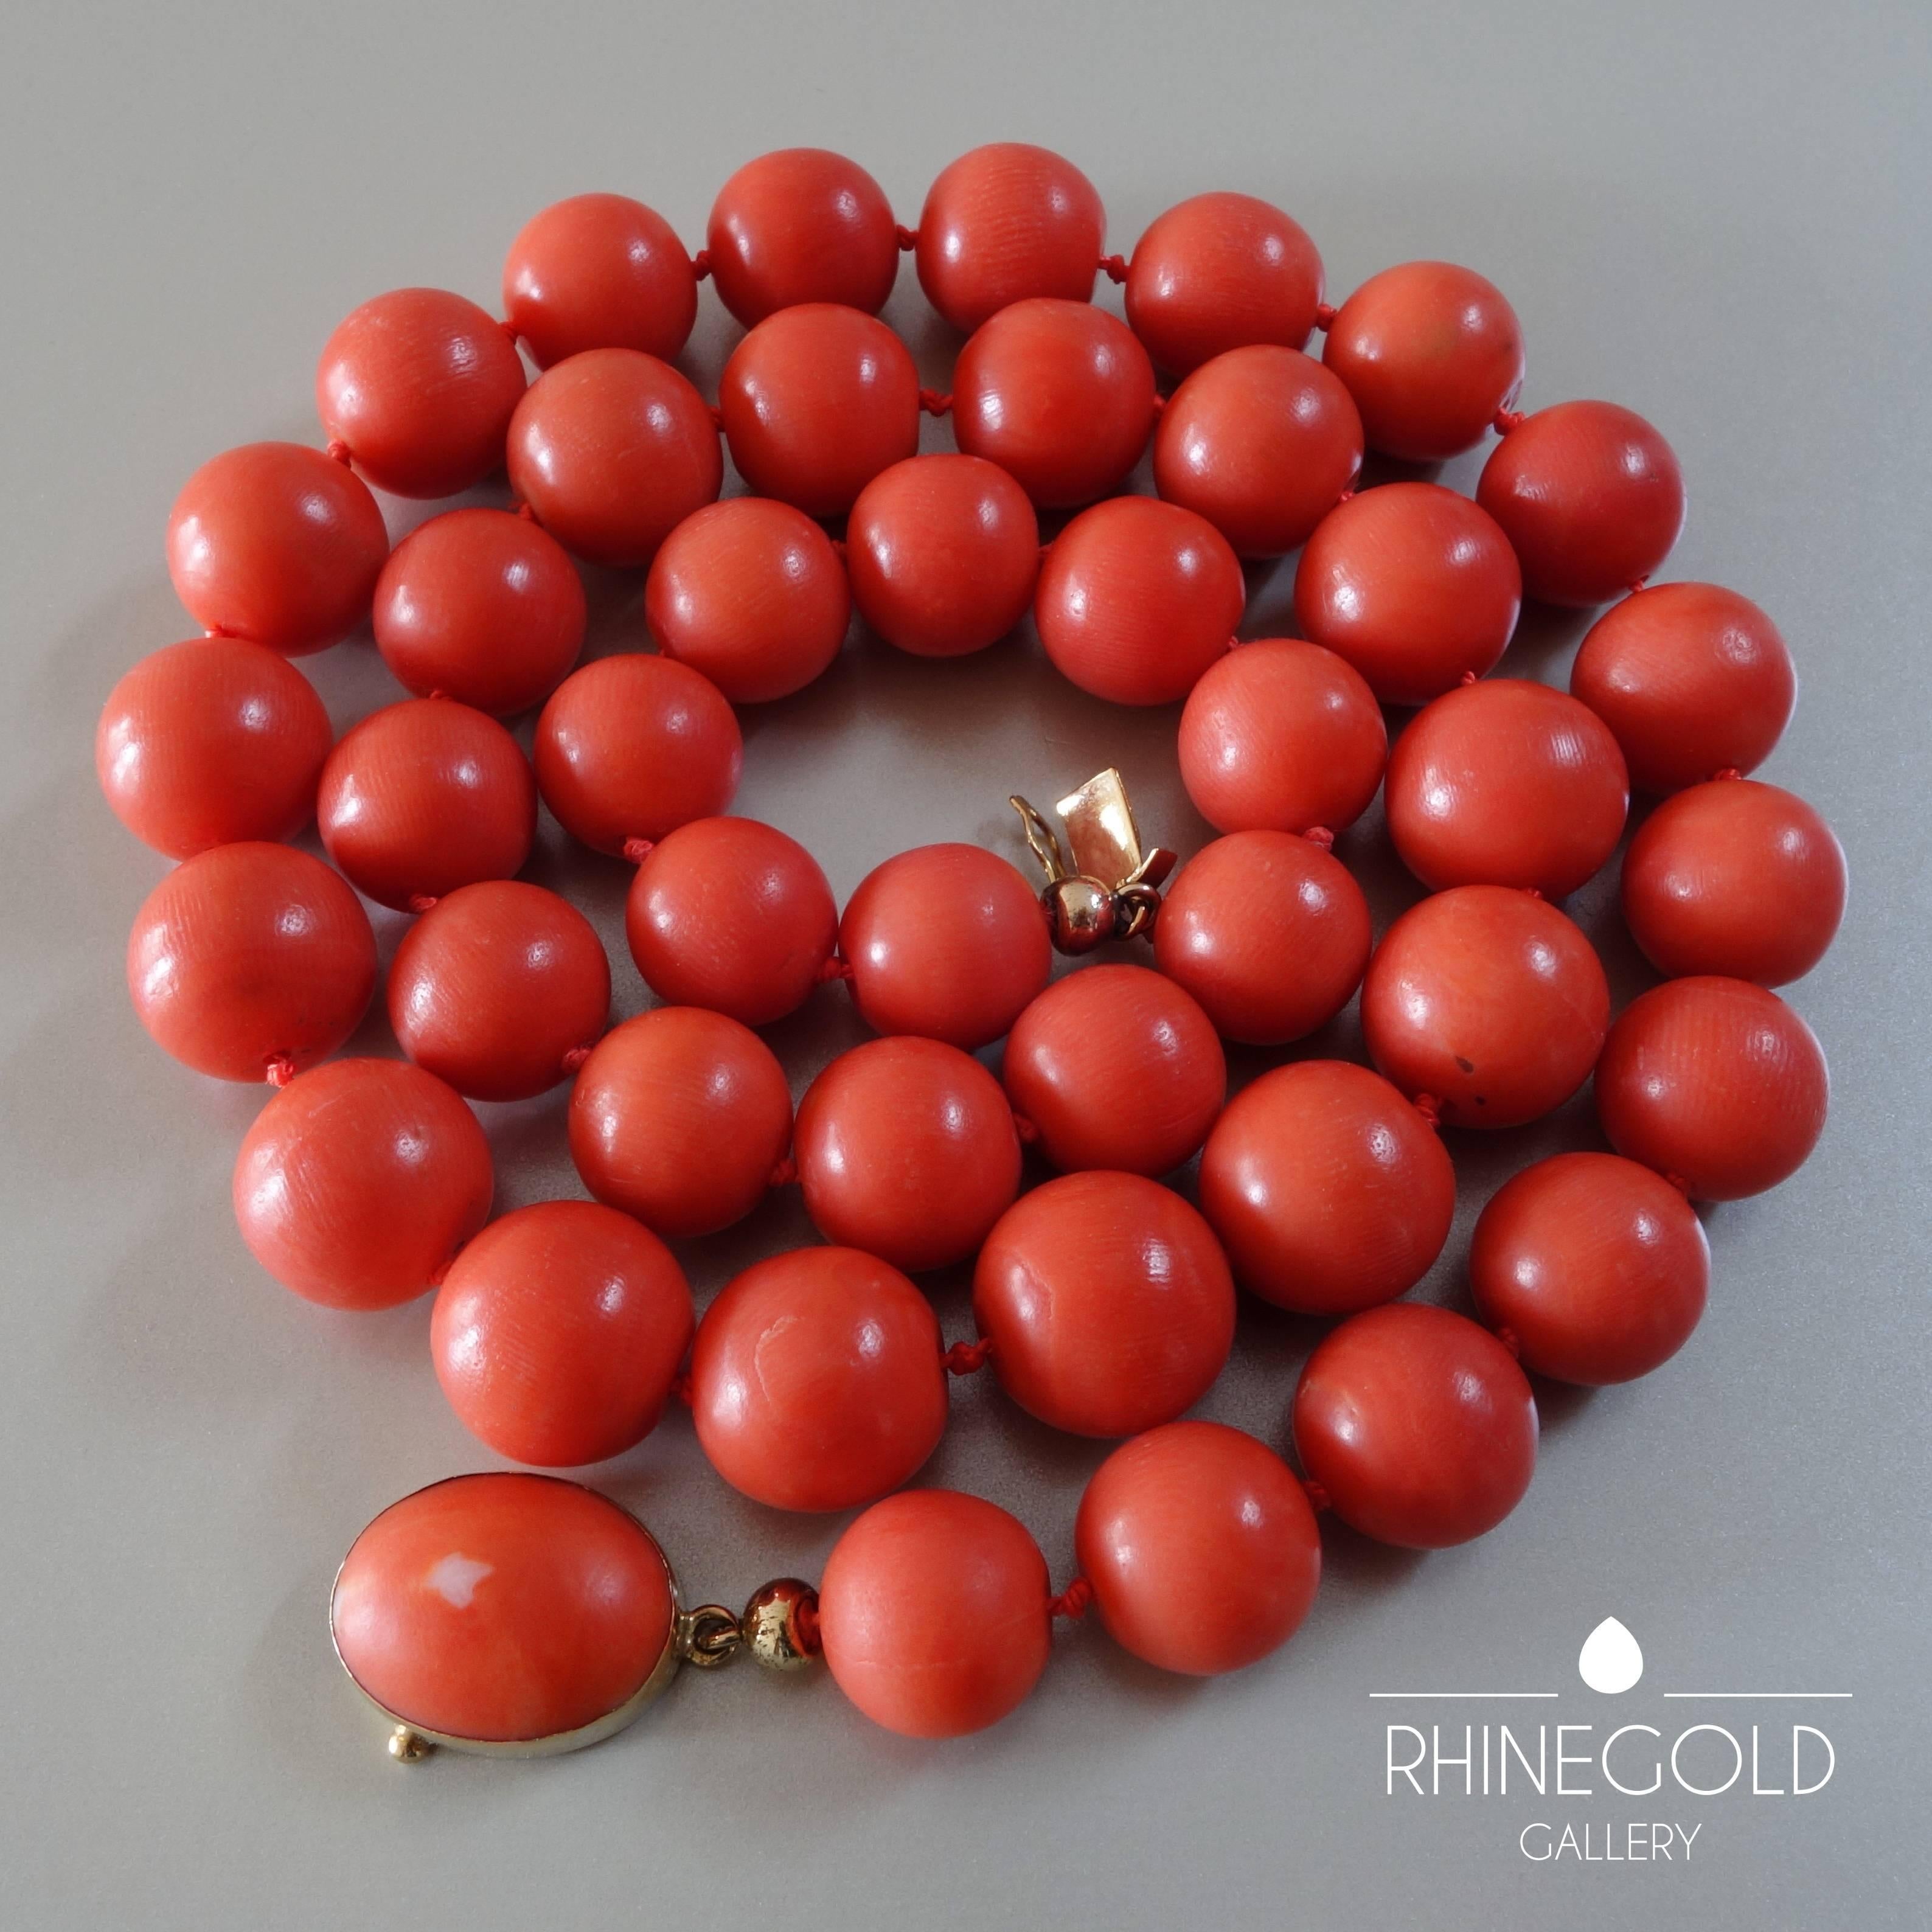 1920s Natural Coral Gold Necklace
18k yellow gold, natural coral
Beads graduating from 10.5 mm to 12 mm in diameter
Length of necklace approx. 54 cm
Weight 89 grams
Marks on clasp: gold content mark ‘750’ for 18k gold
1920s – 1930s

Natural